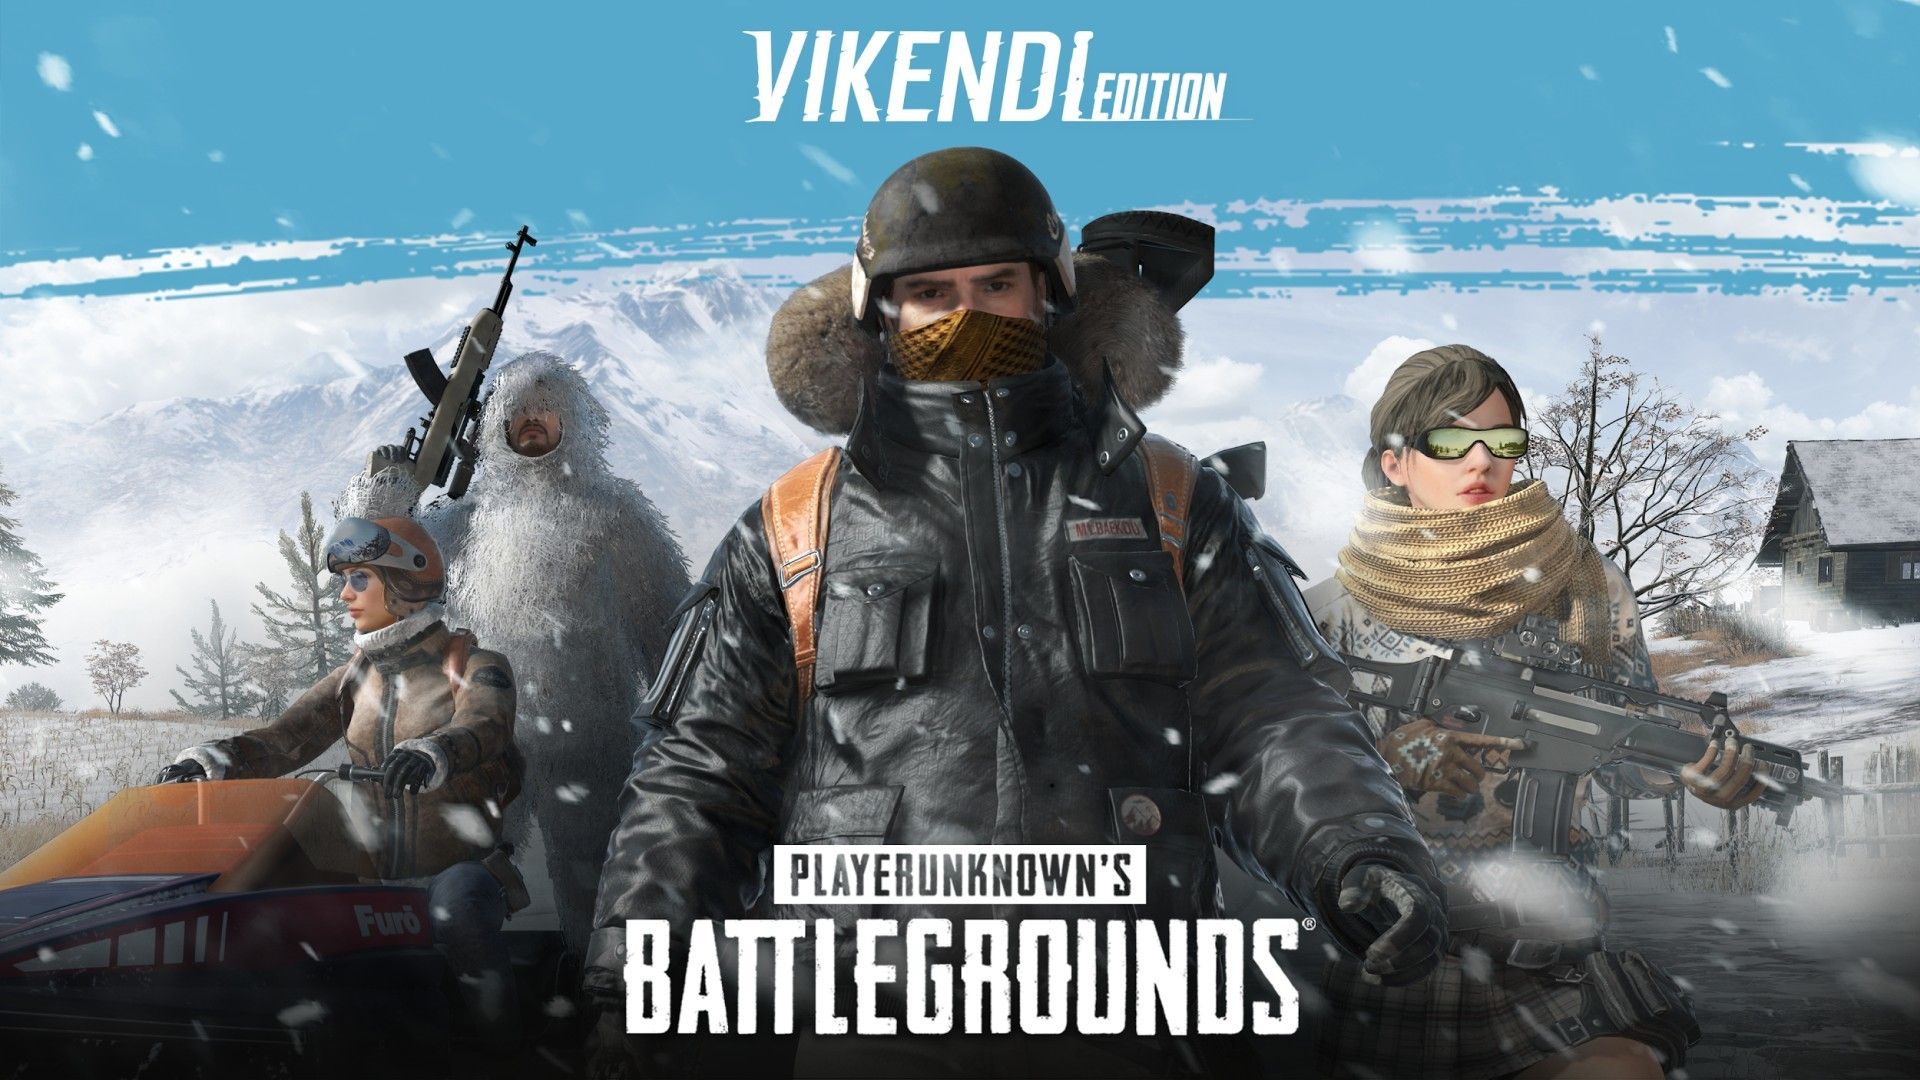 PUBG's New Winter Themed Map, Vikendi, Is Out Now On Xbox One